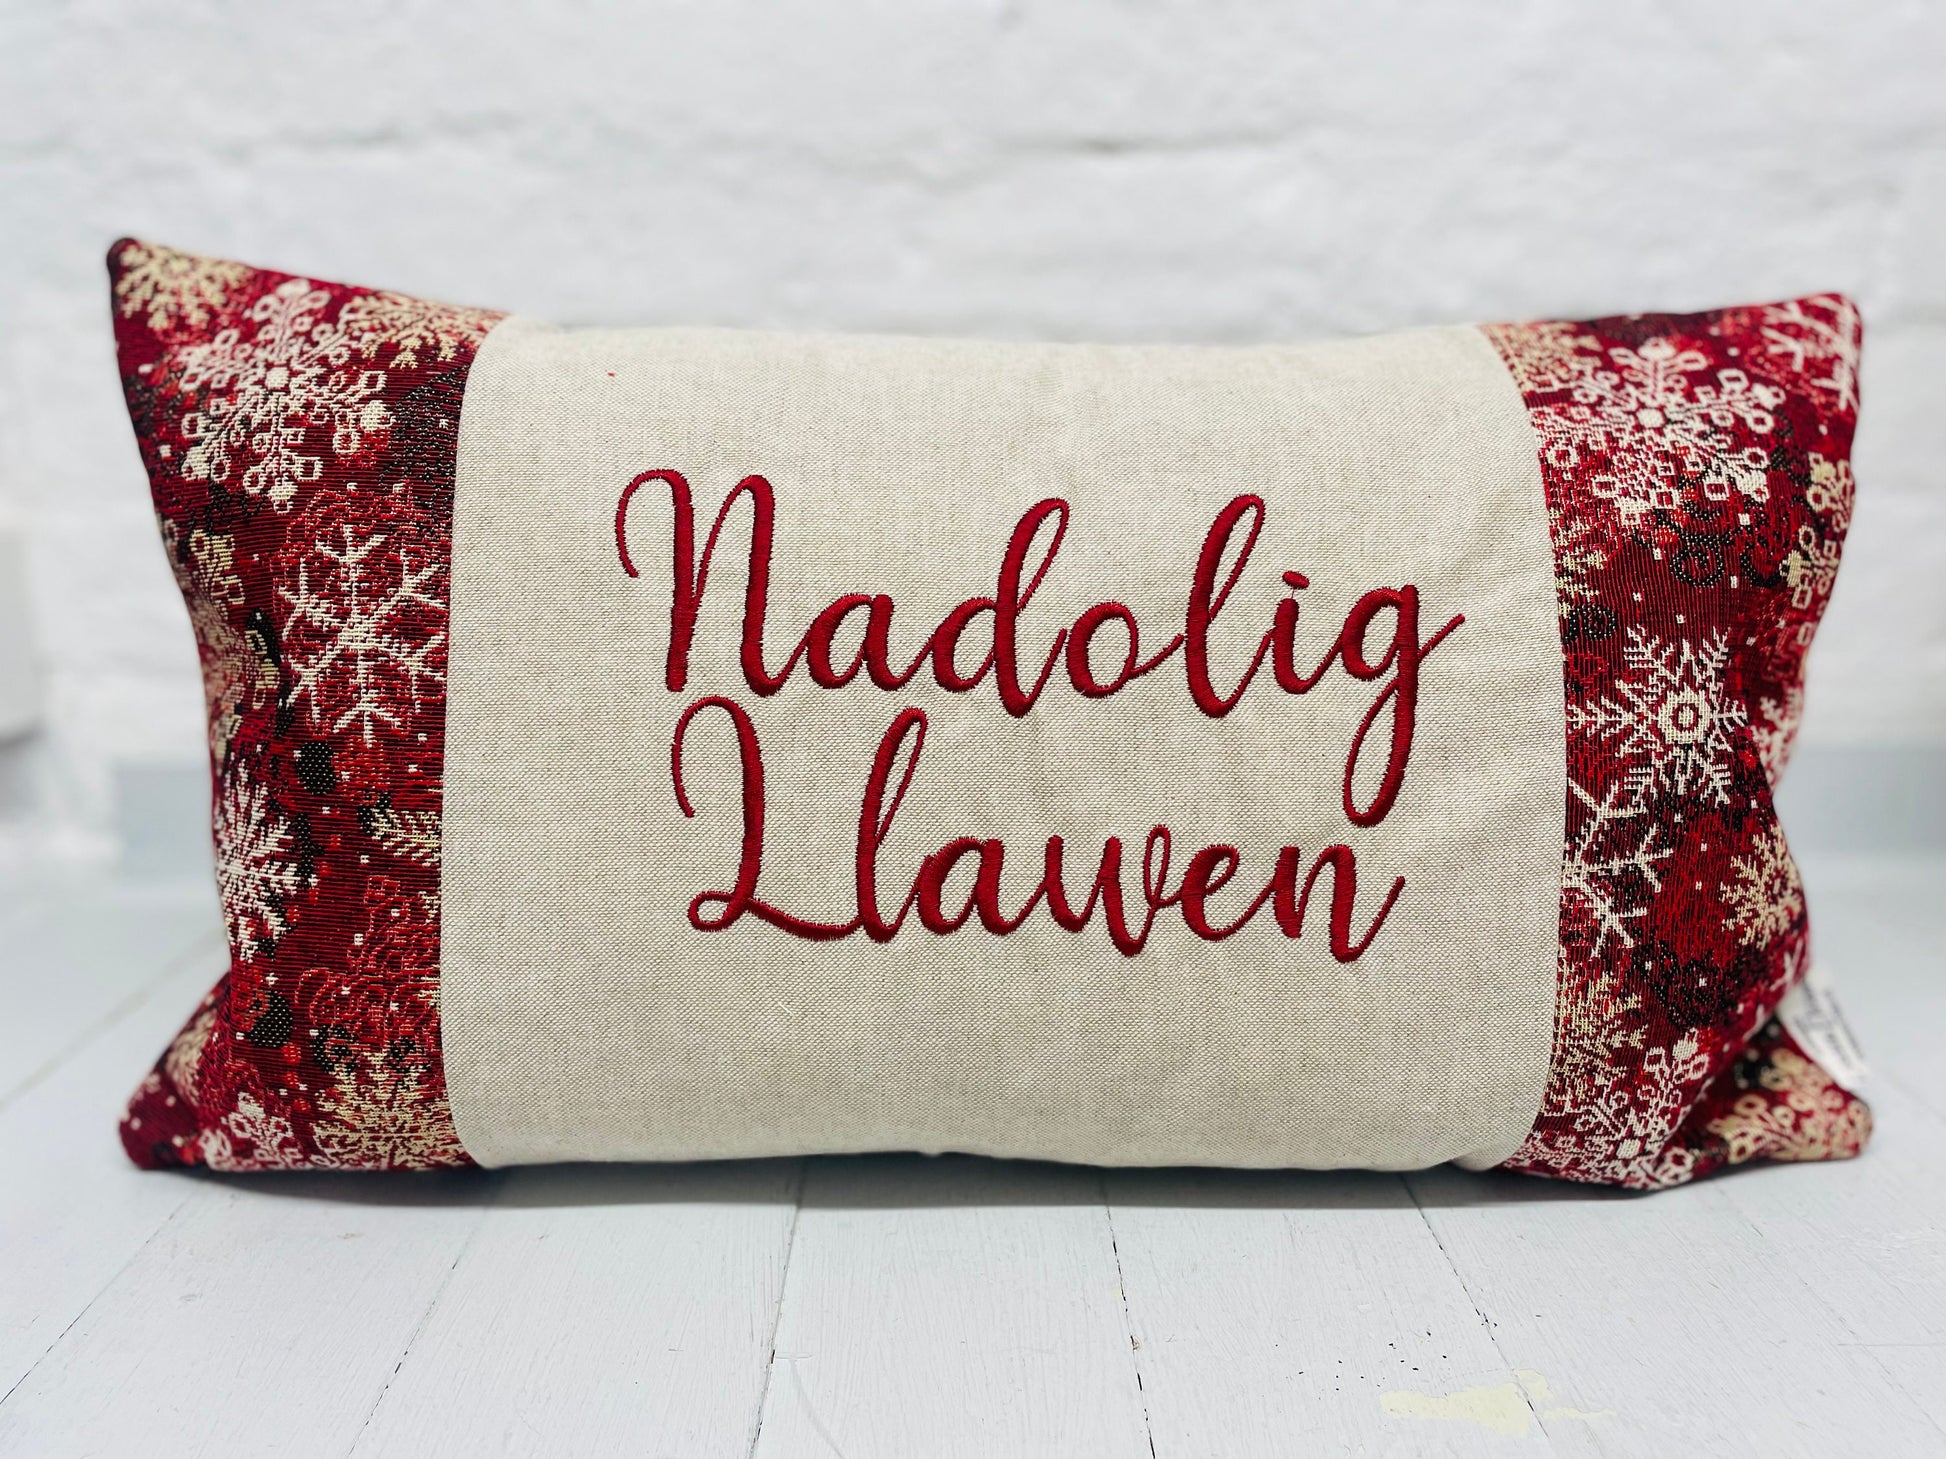 Nadolig Llawen Christmas Cushion- Snowflake Red and Gold Tapestry style cushion.